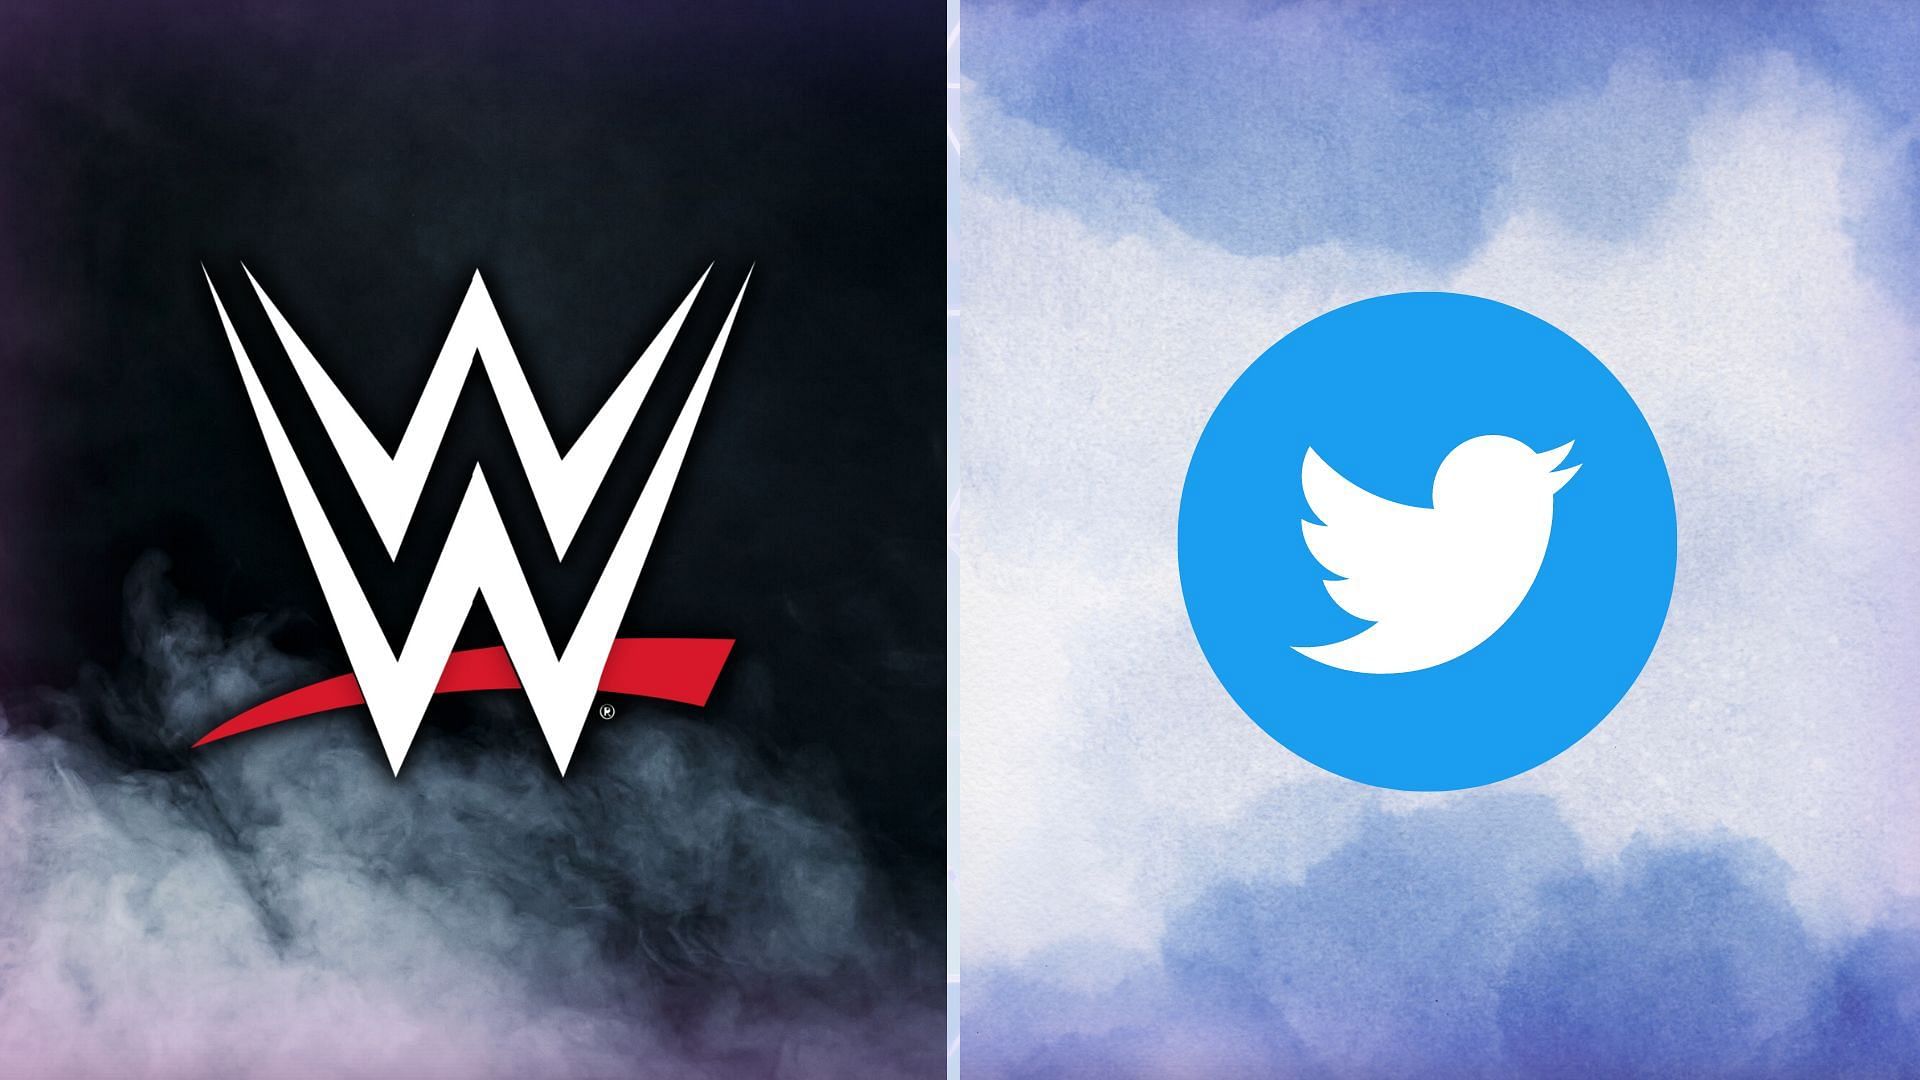 WWE and Twitter logo